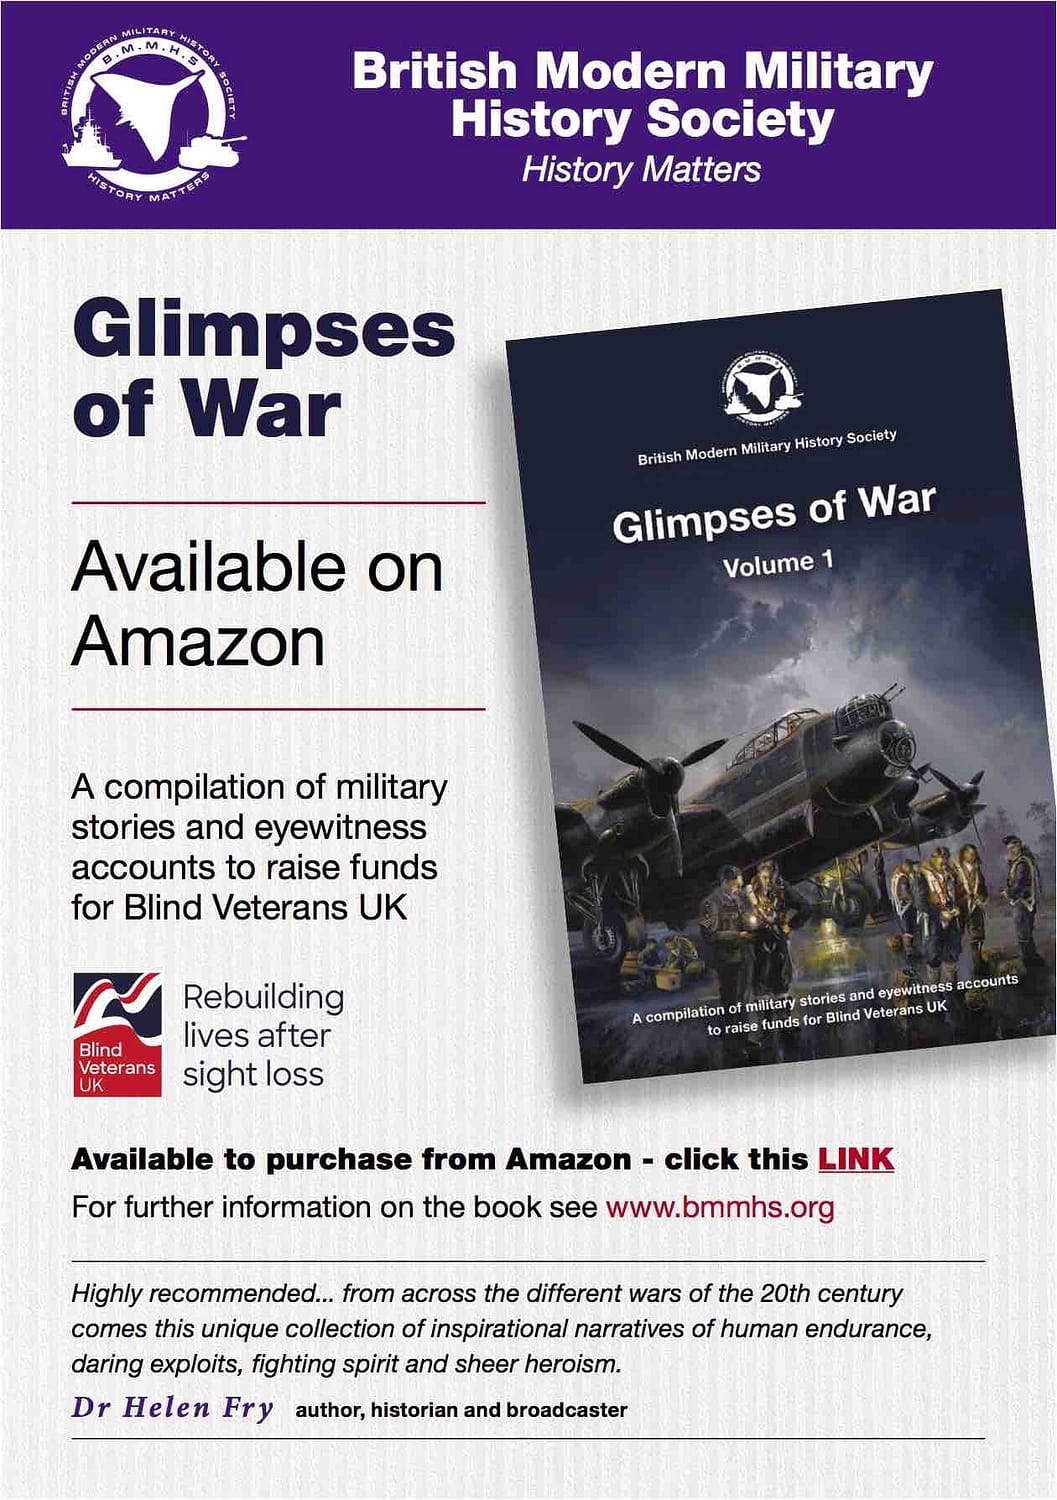 Glimpses of War – Kindle version now available on Amazon